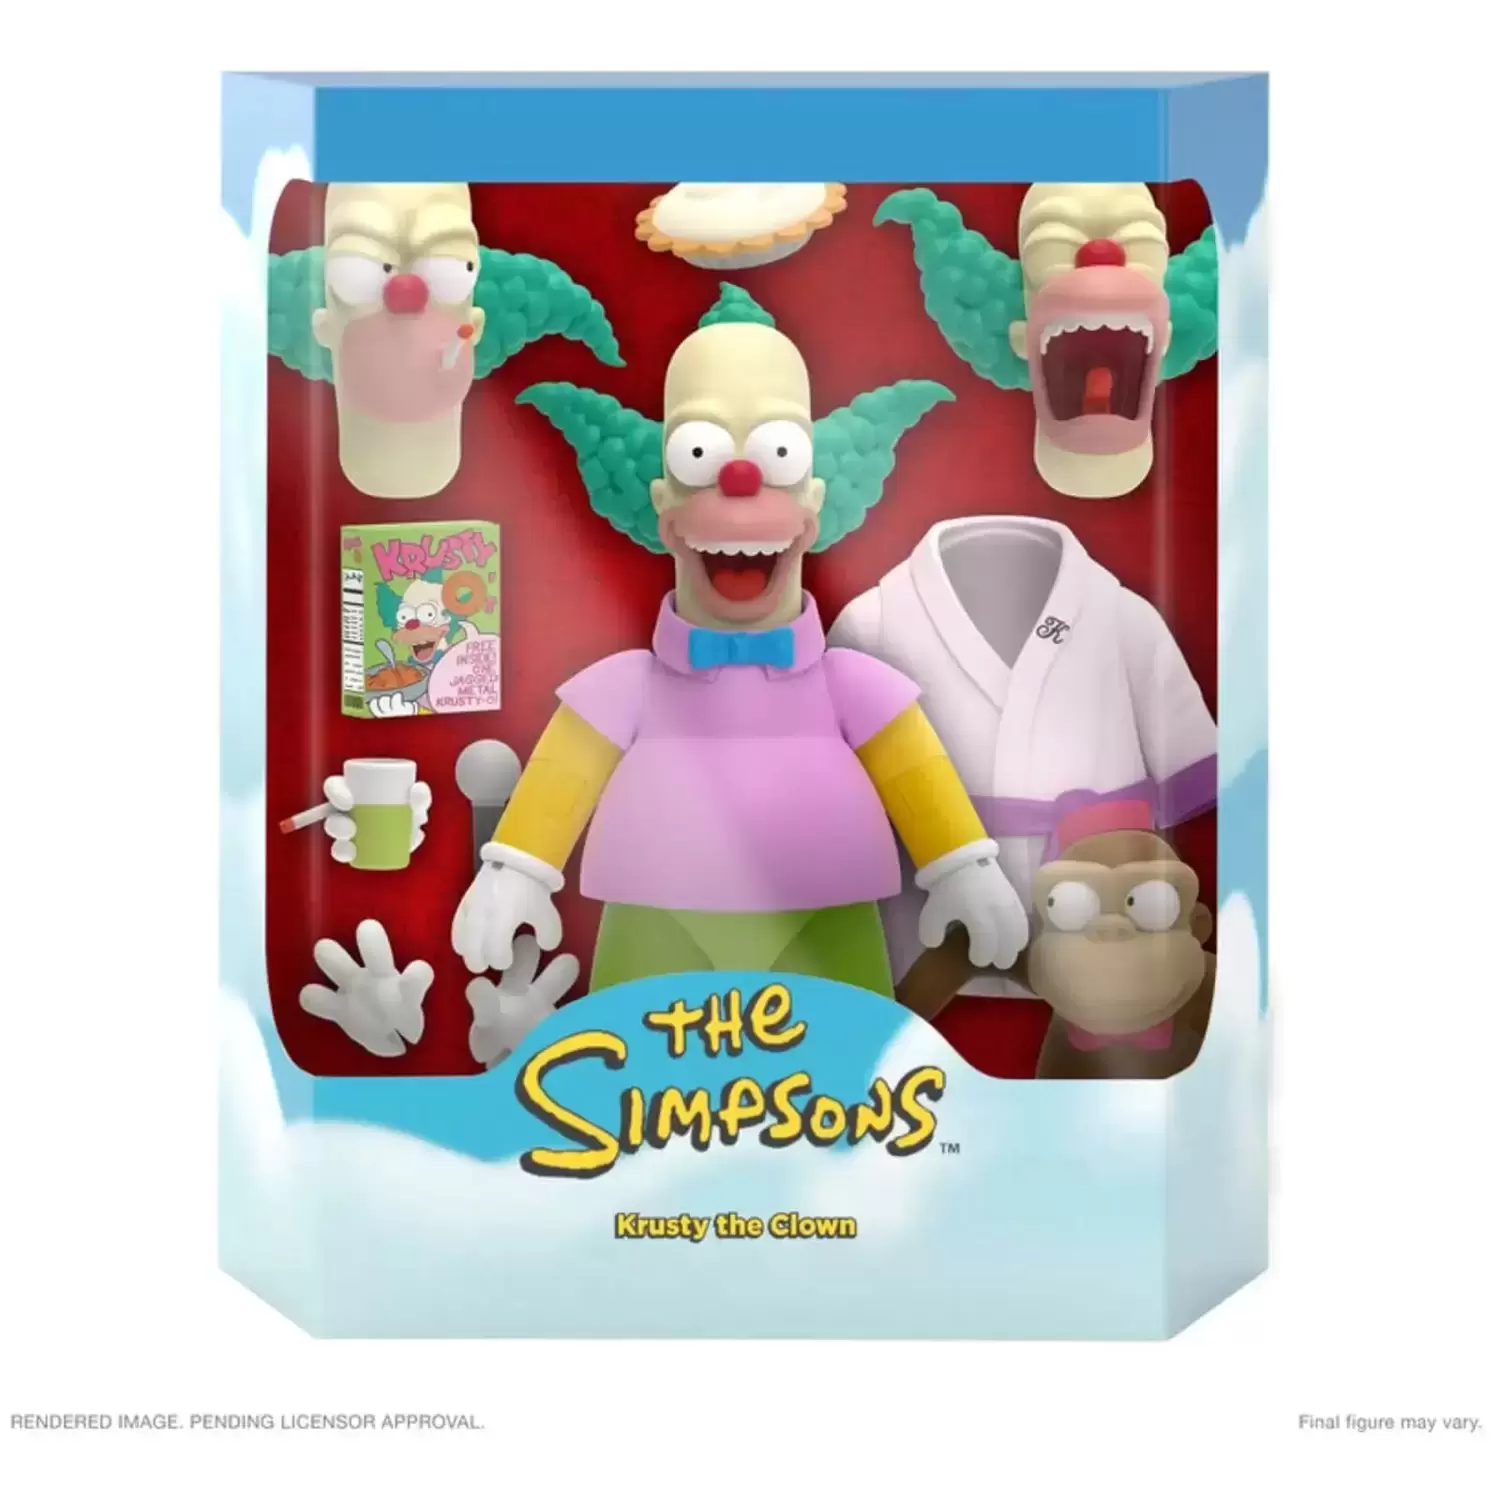 Super7 - ULTIMATES! - The Simpsons - Krusty The Clown